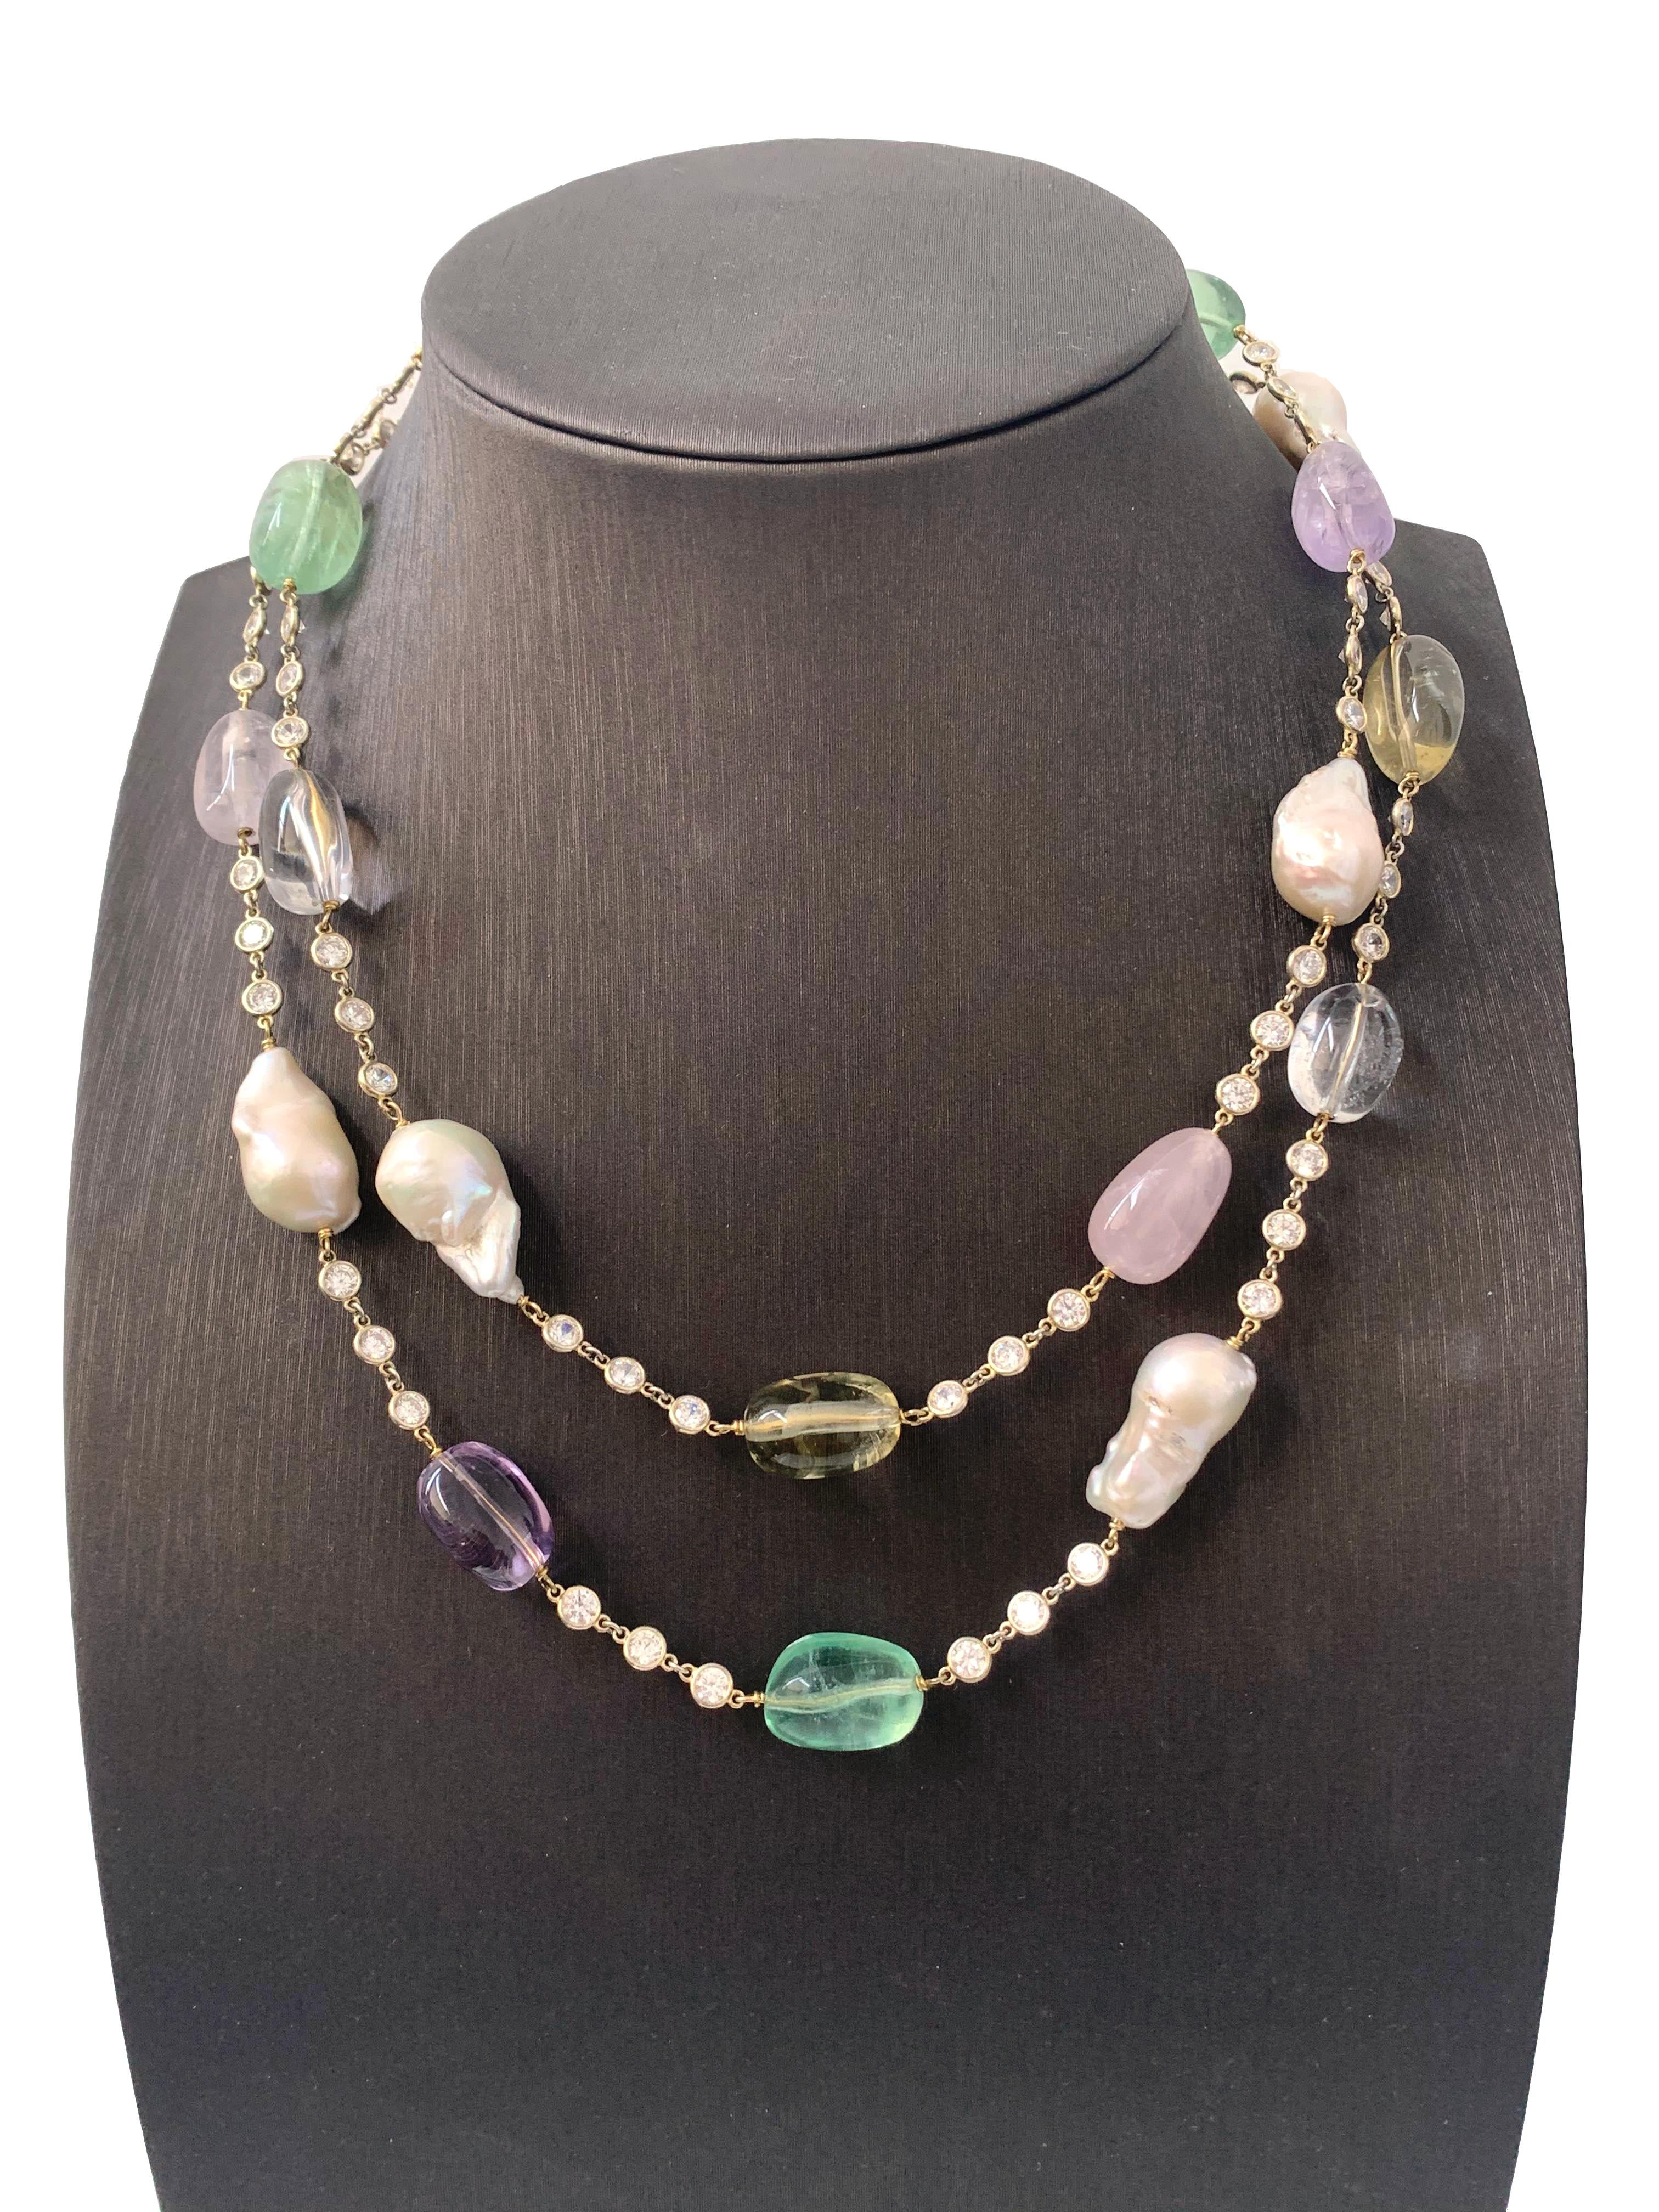 Discover the beautiful tumbled multicolor gemstones and baroque pearl station necklace.

This necklace feature 14 pcs of assorted beautiful multicolor gemstones  (Lemon Quartz, Rose Quartz, Amethyst, Fluorite, Clear Quartz) and 7 pcs of unique and